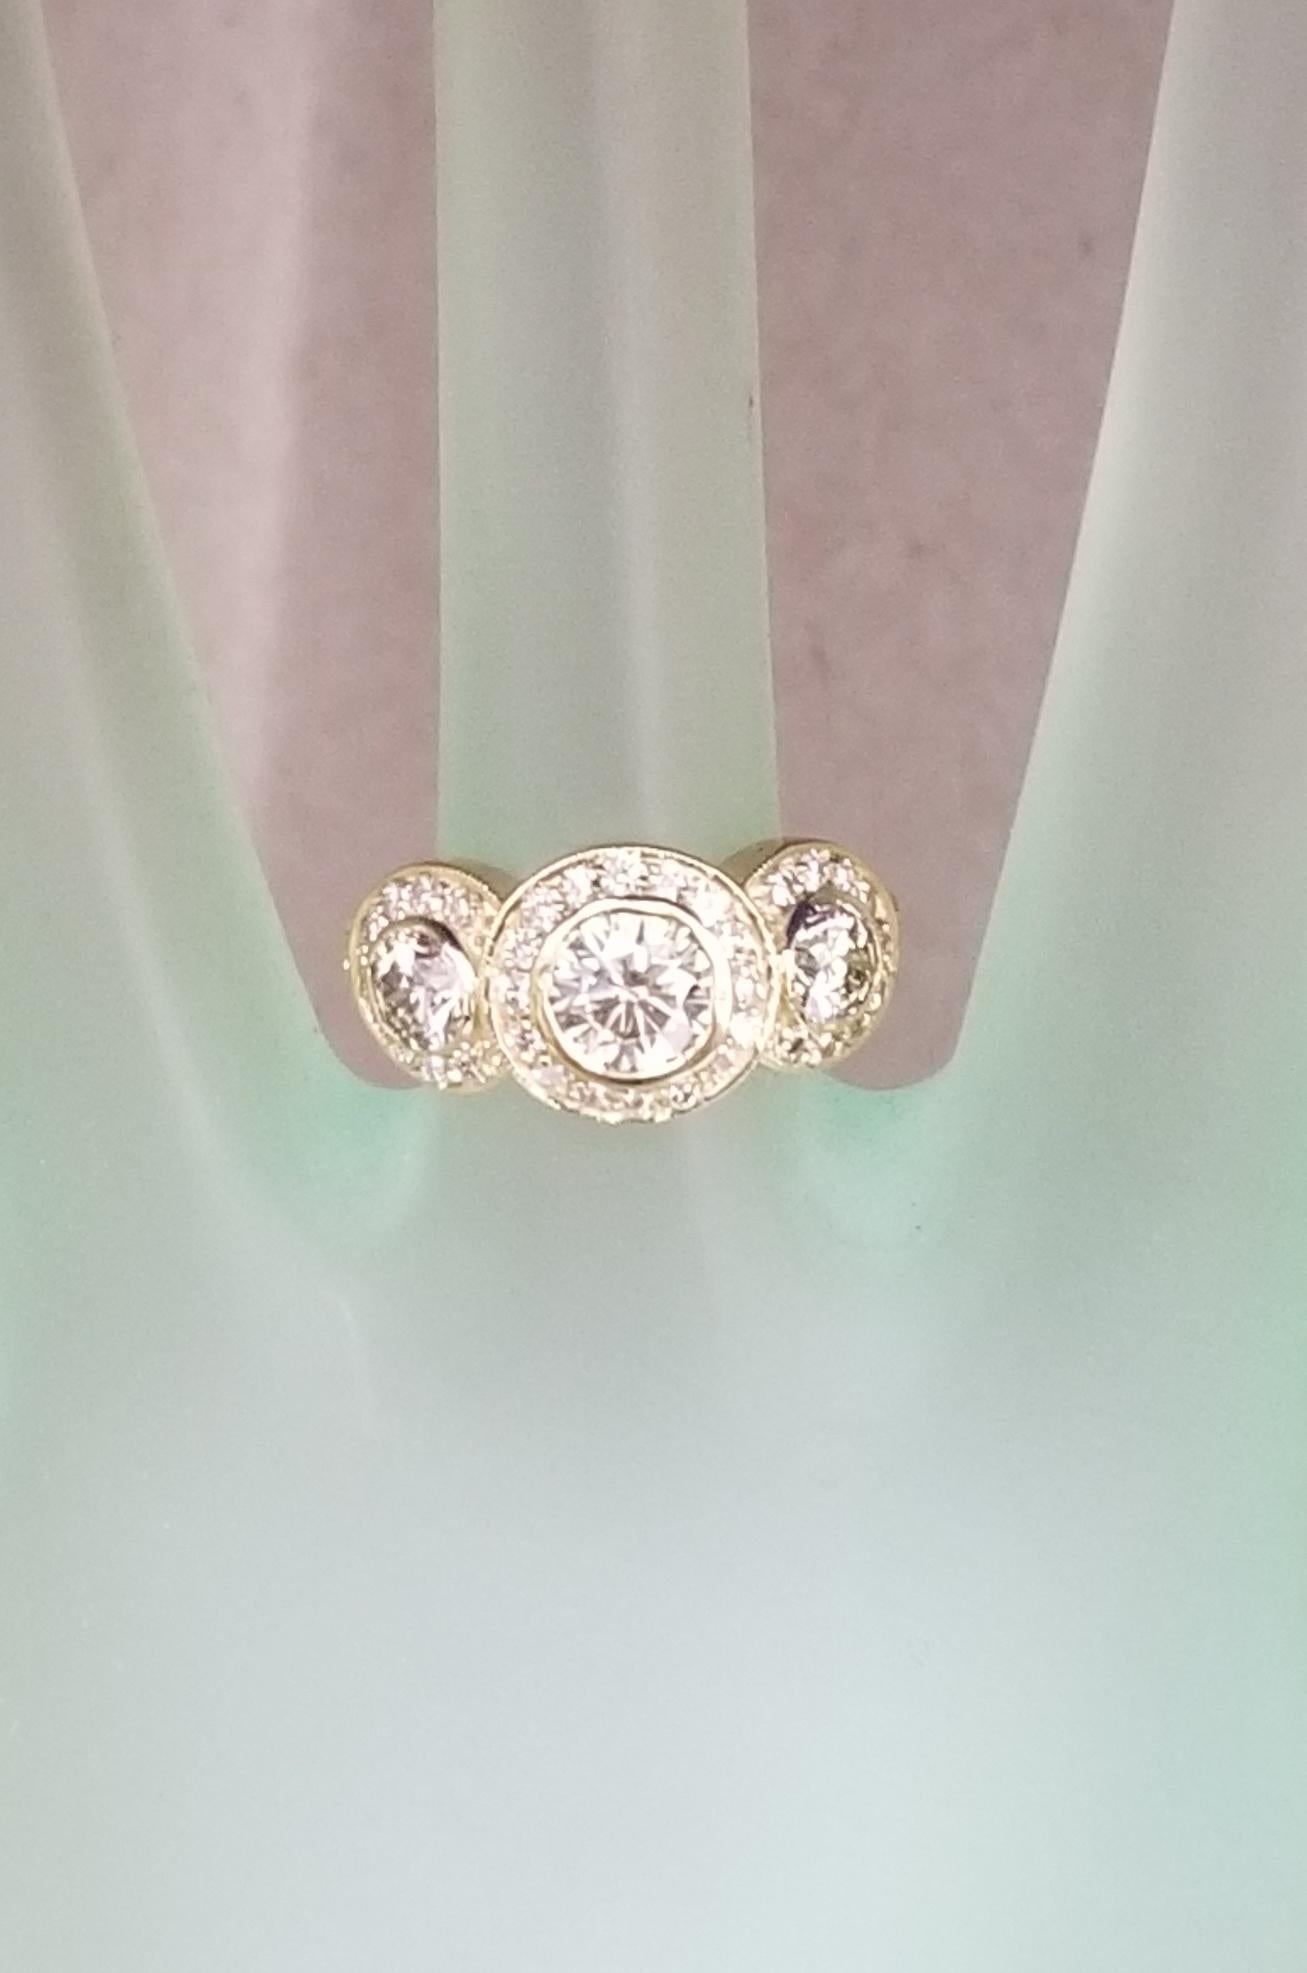 3-Stone Diamond Halo Ring 2.11cts. total weight For Sale 1